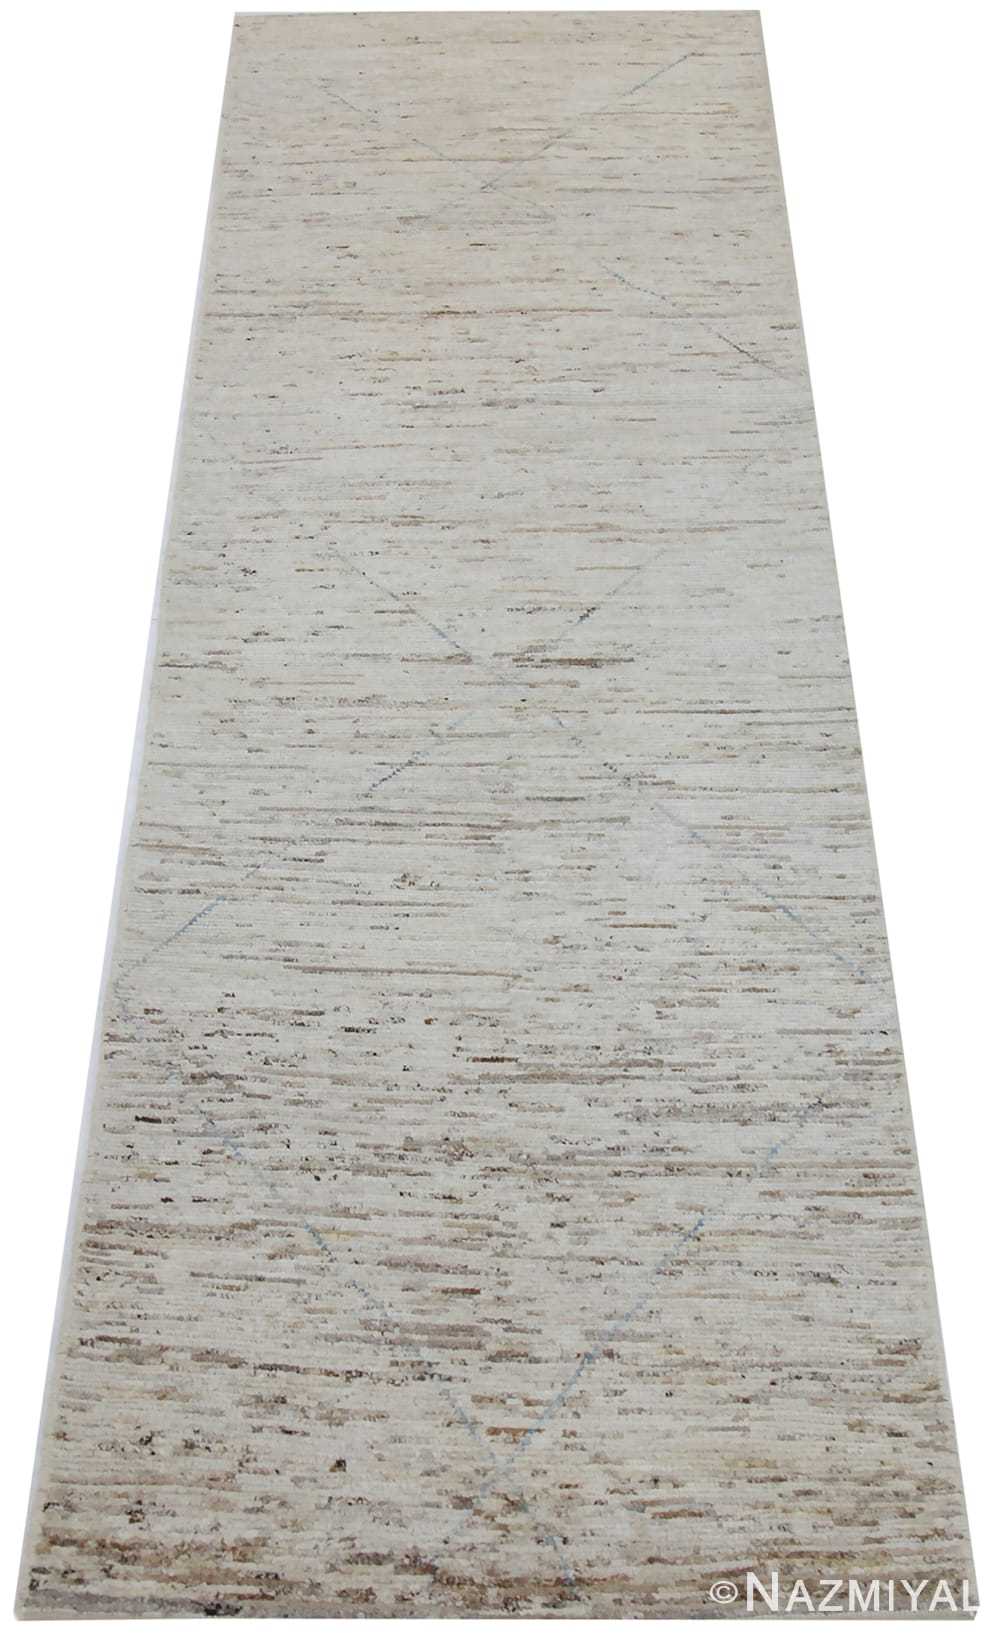 Whole View Of Beige Modern Moroccan Style Afghan Runner Rug 60167 by Nazmiyal NYC